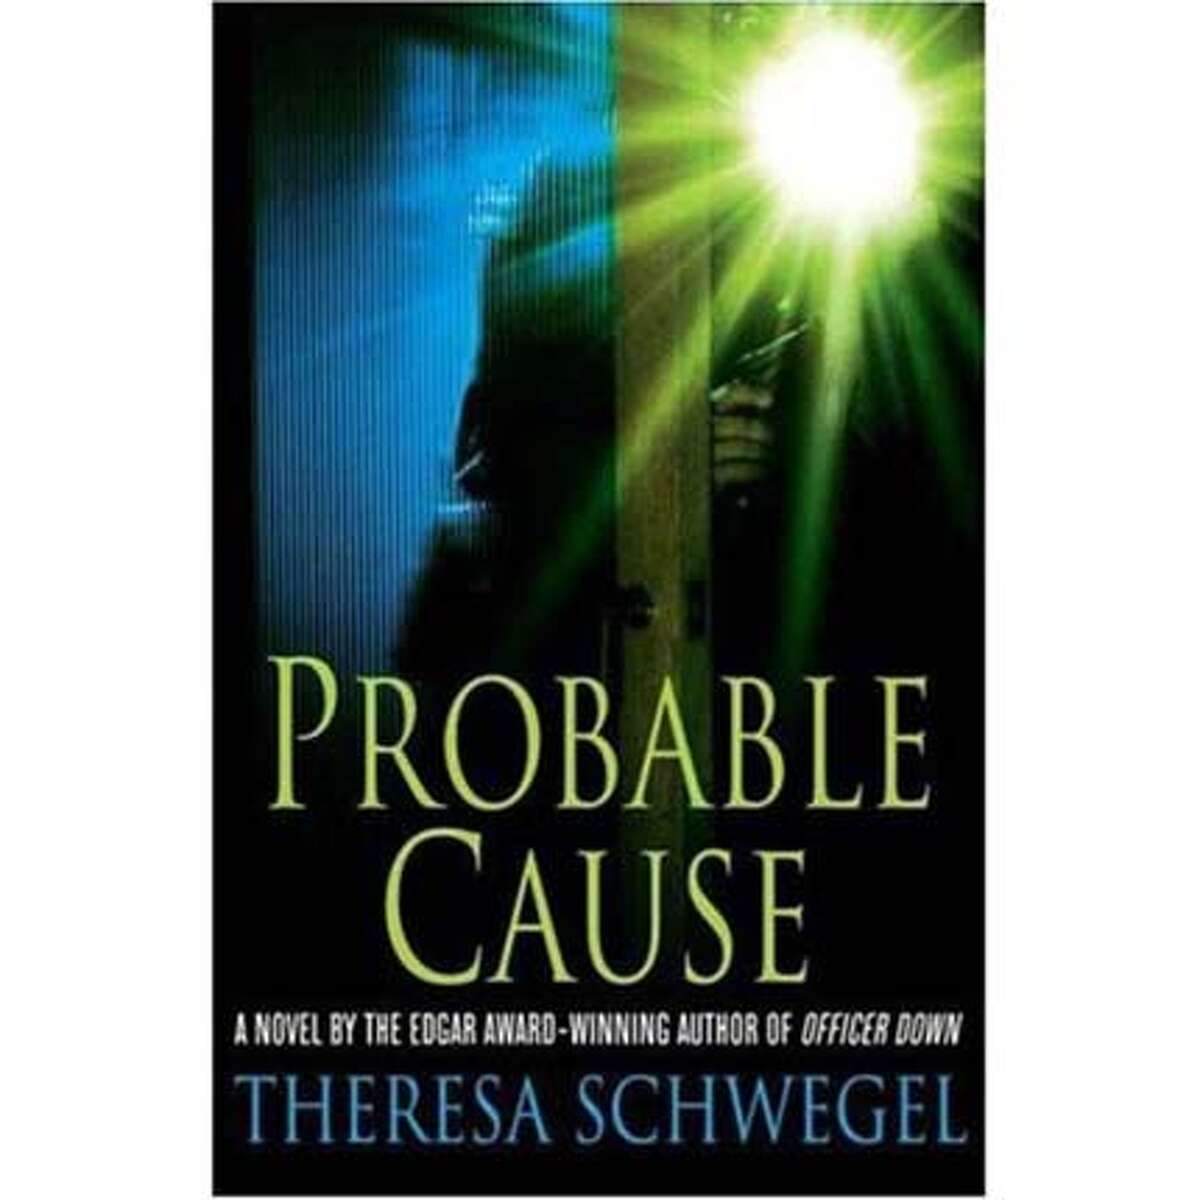 "Probable Cause" by Theresa Schwegel